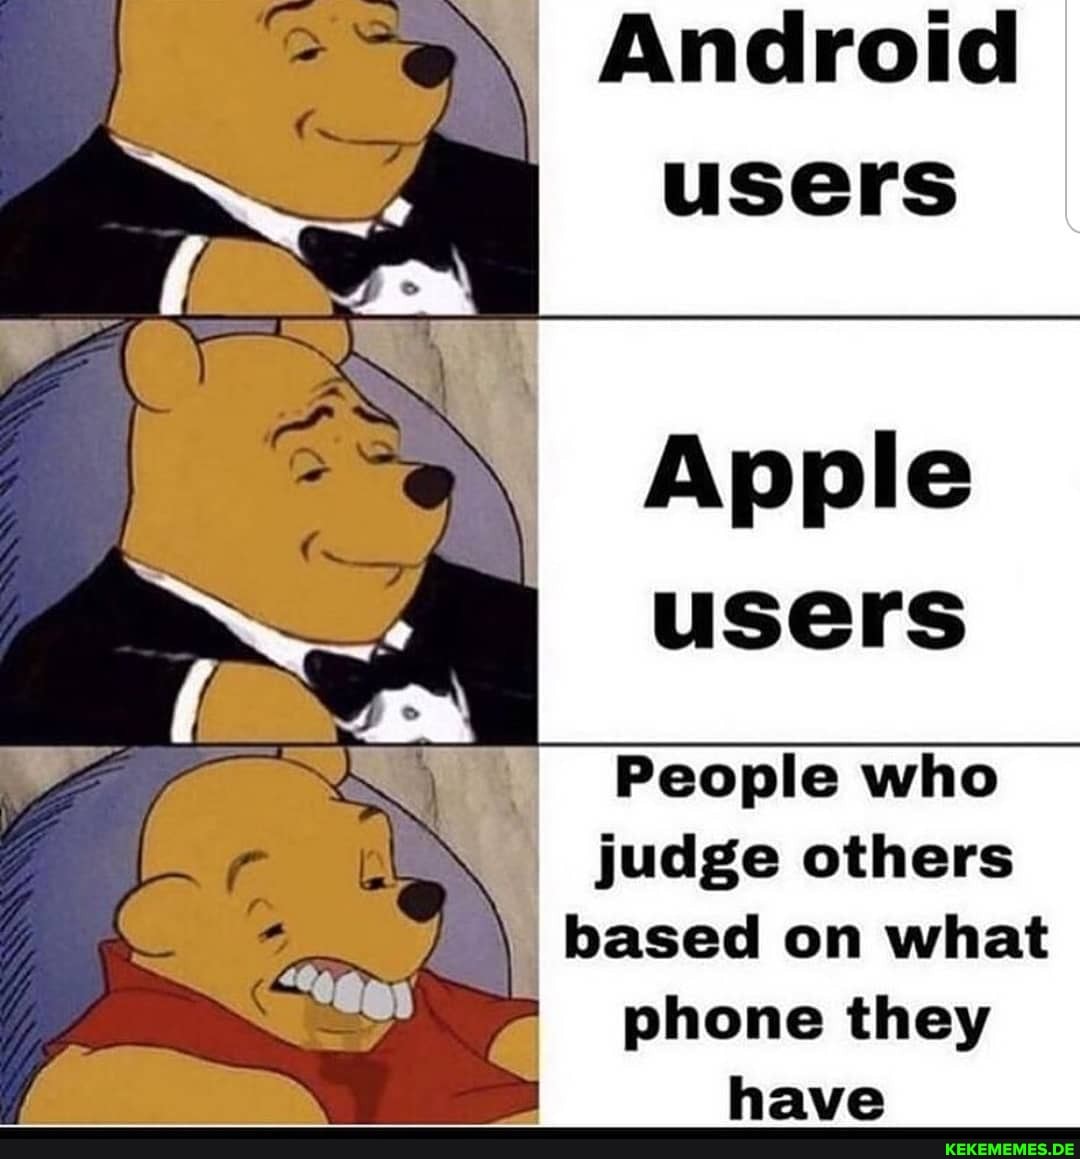 Android users judge others based on what phone they